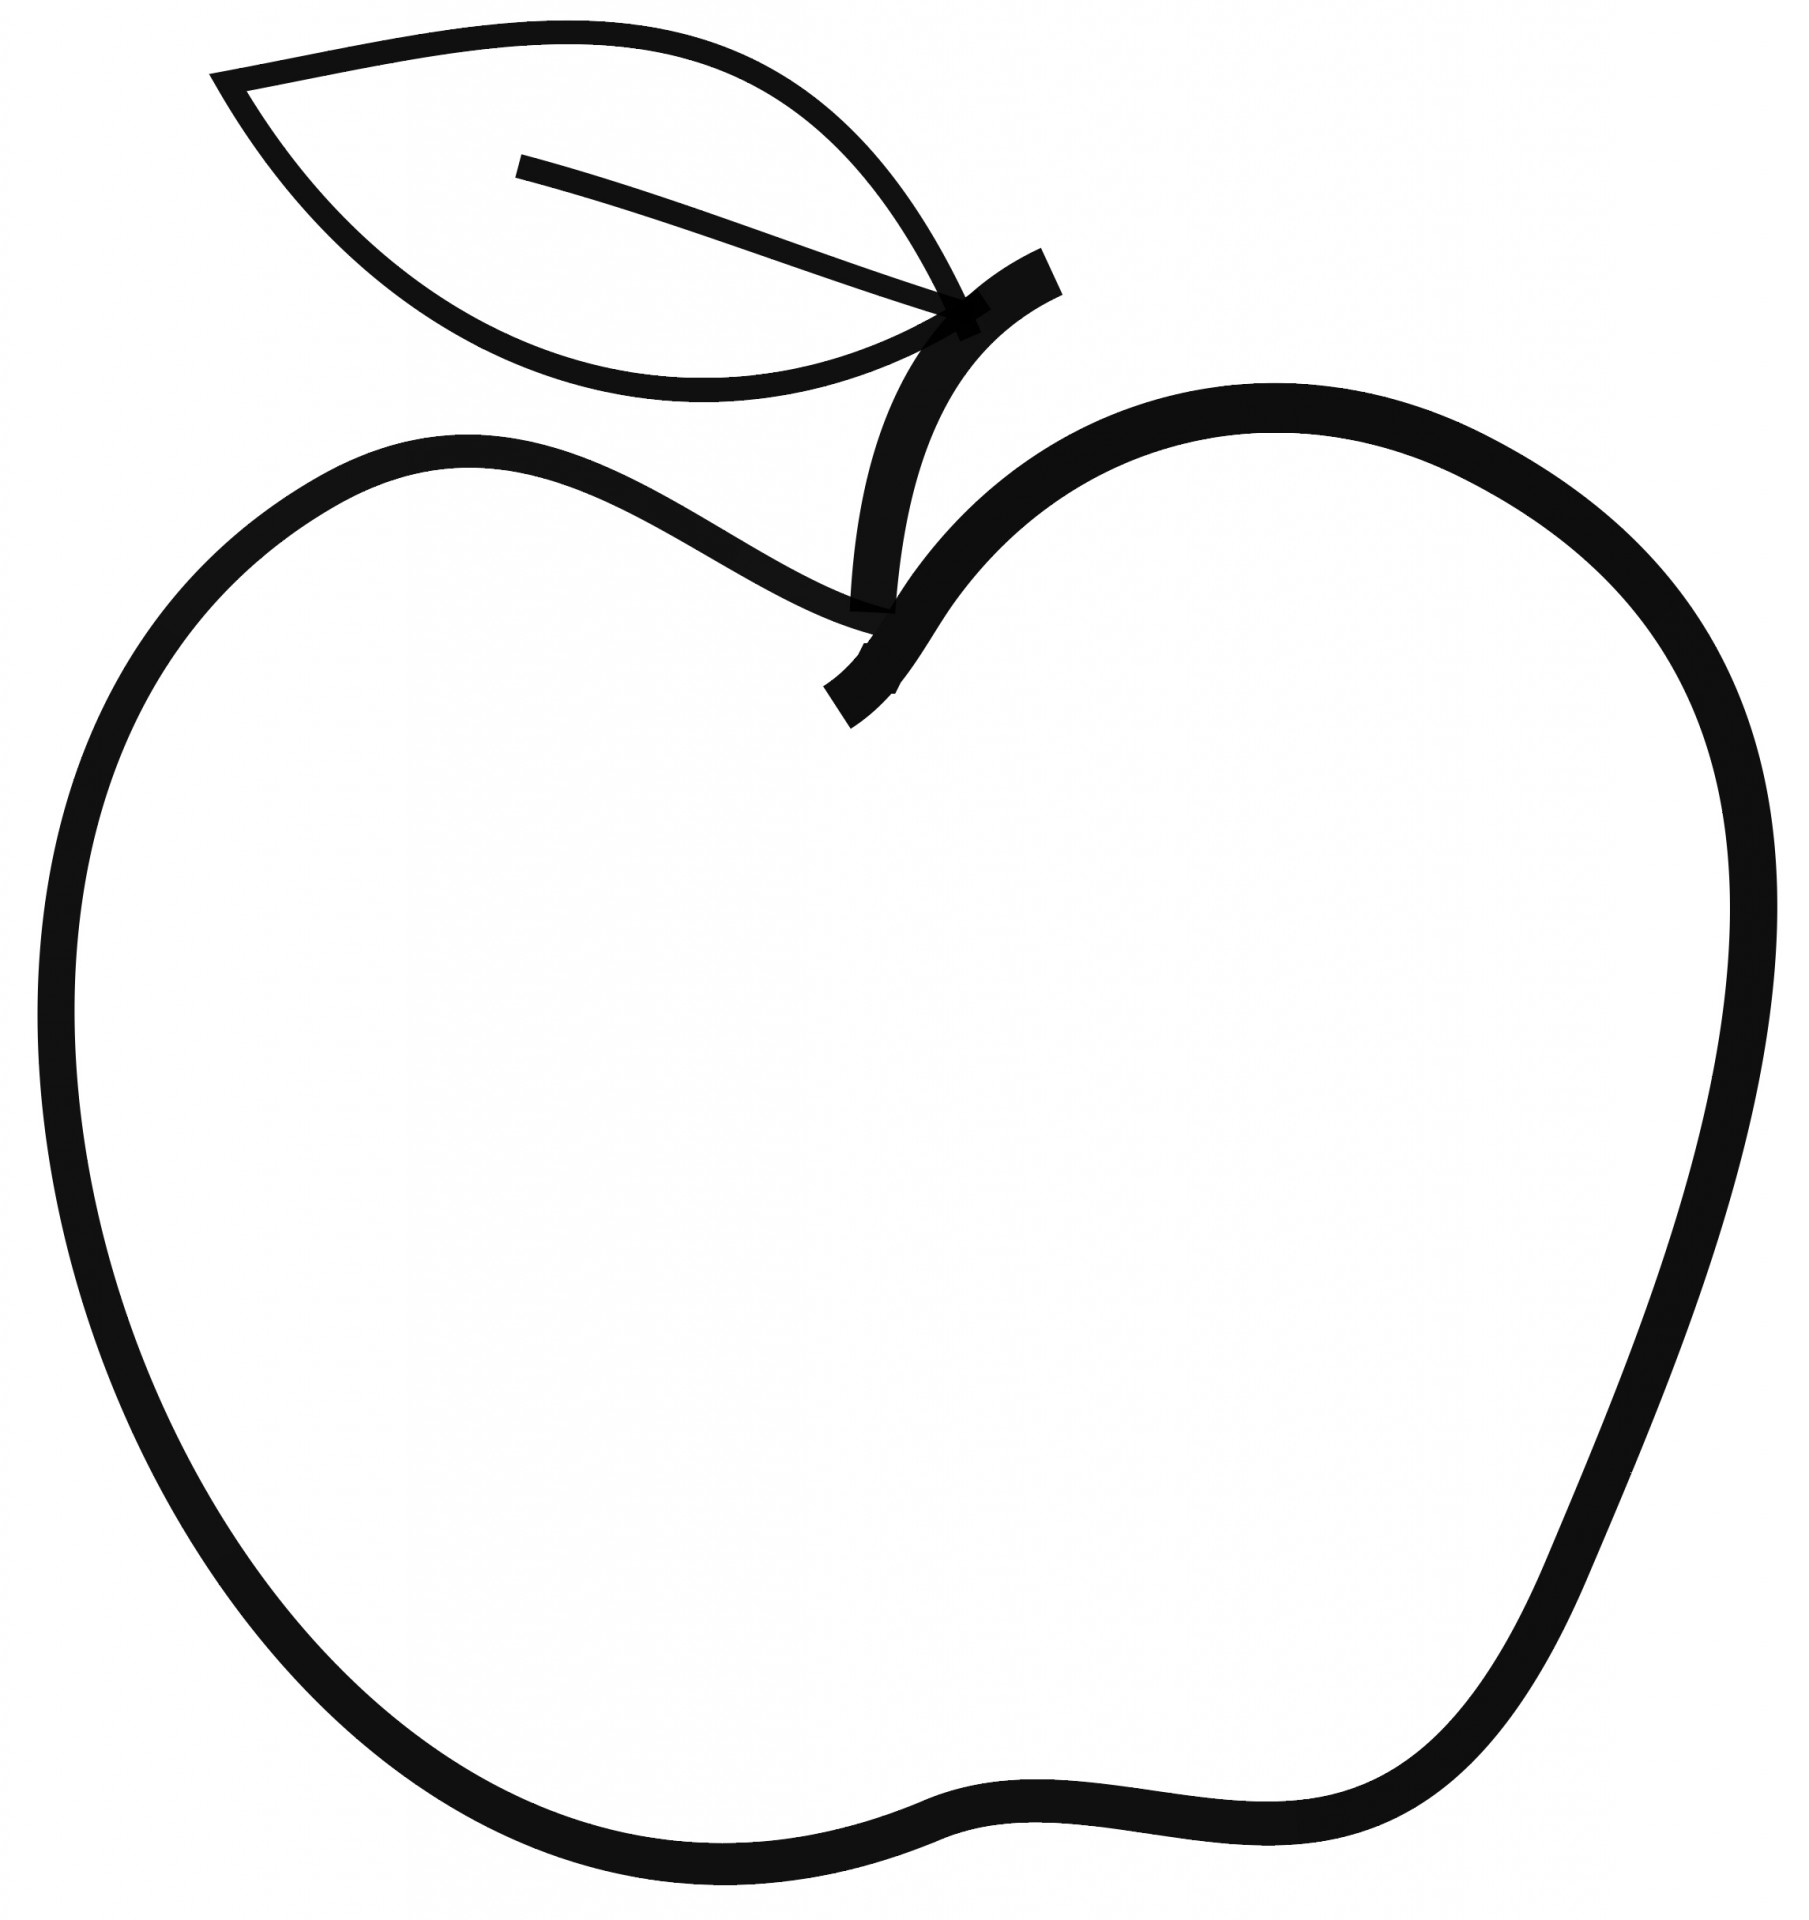 apple clipart black and white - photo #16